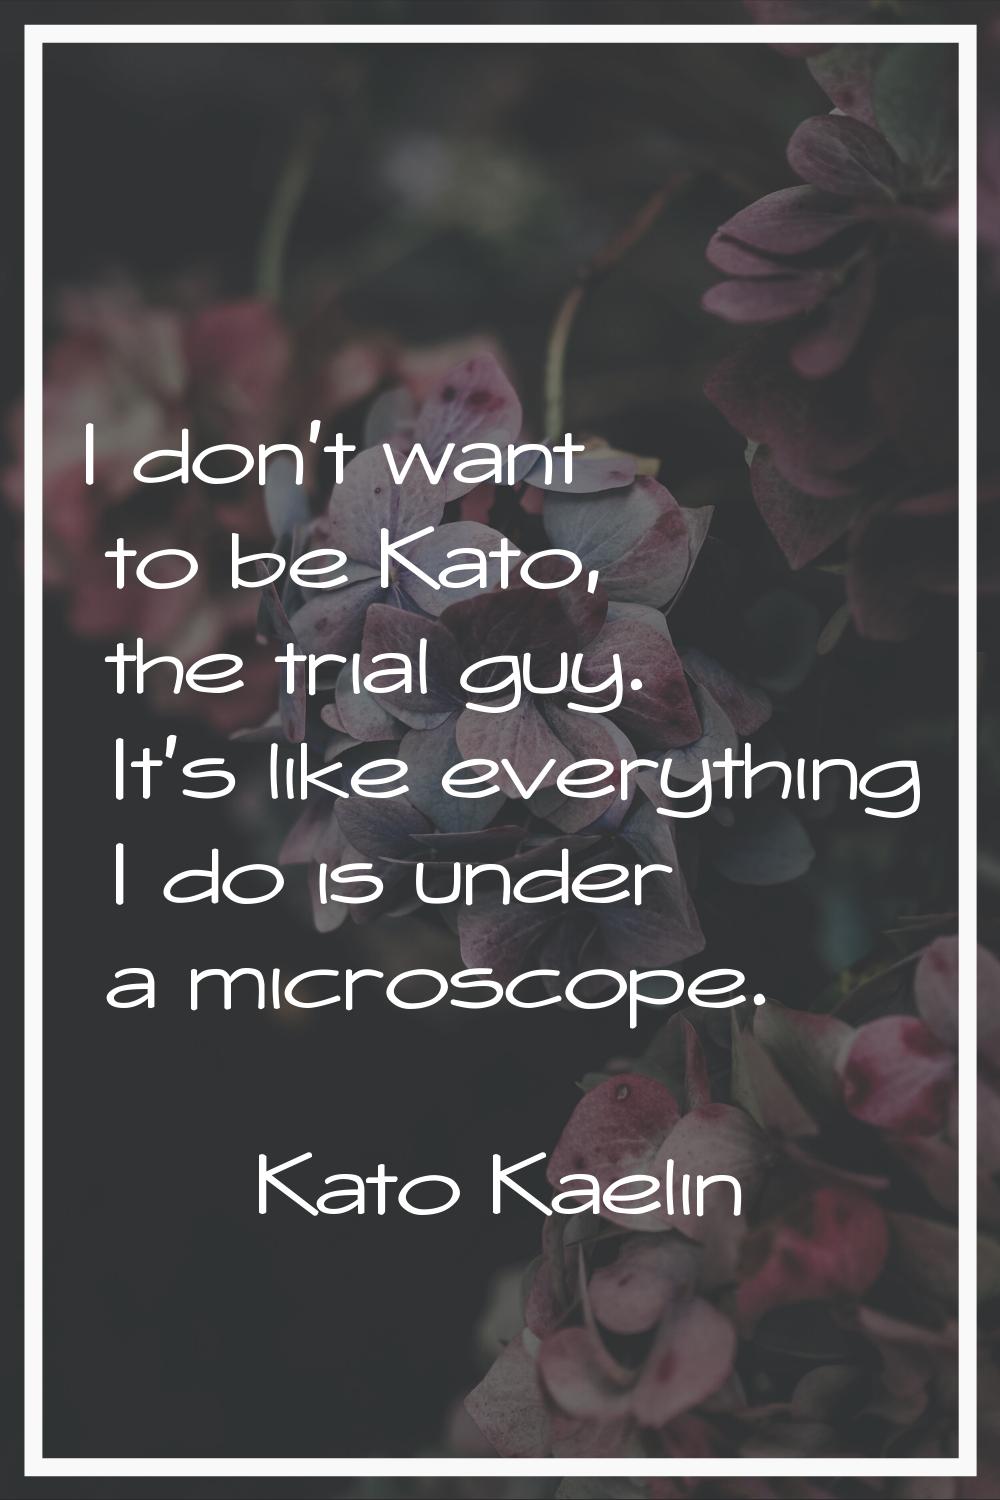 I don't want to be Kato, the trial guy. It's like everything I do is under a microscope.